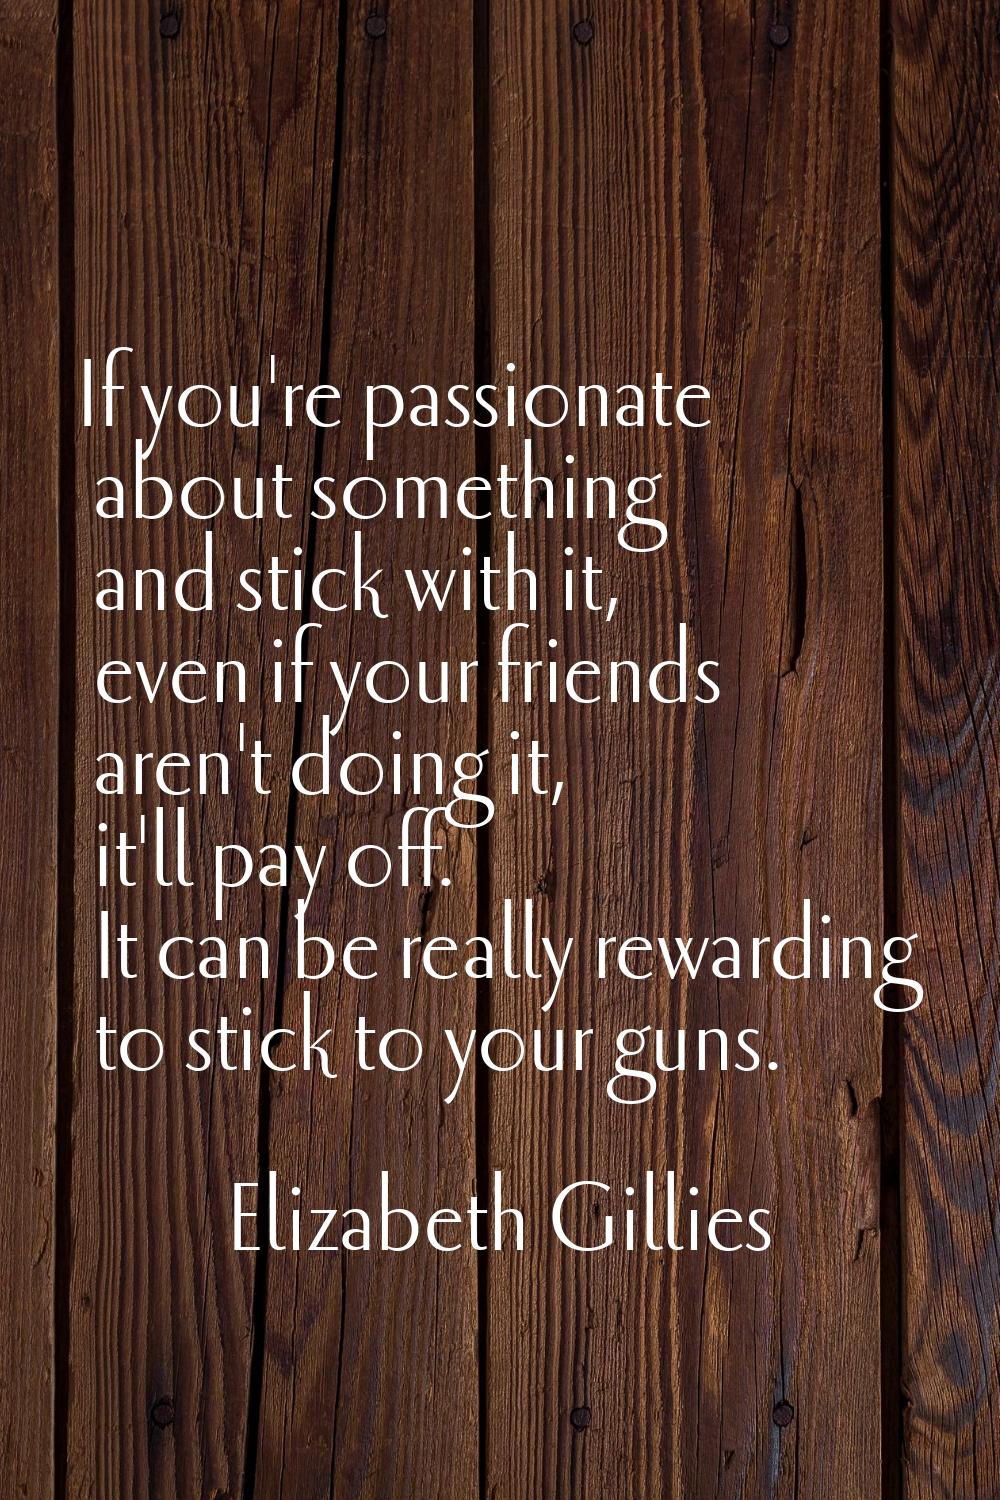 If you're passionate about something and stick with it, even if your friends aren't doing it, it'll